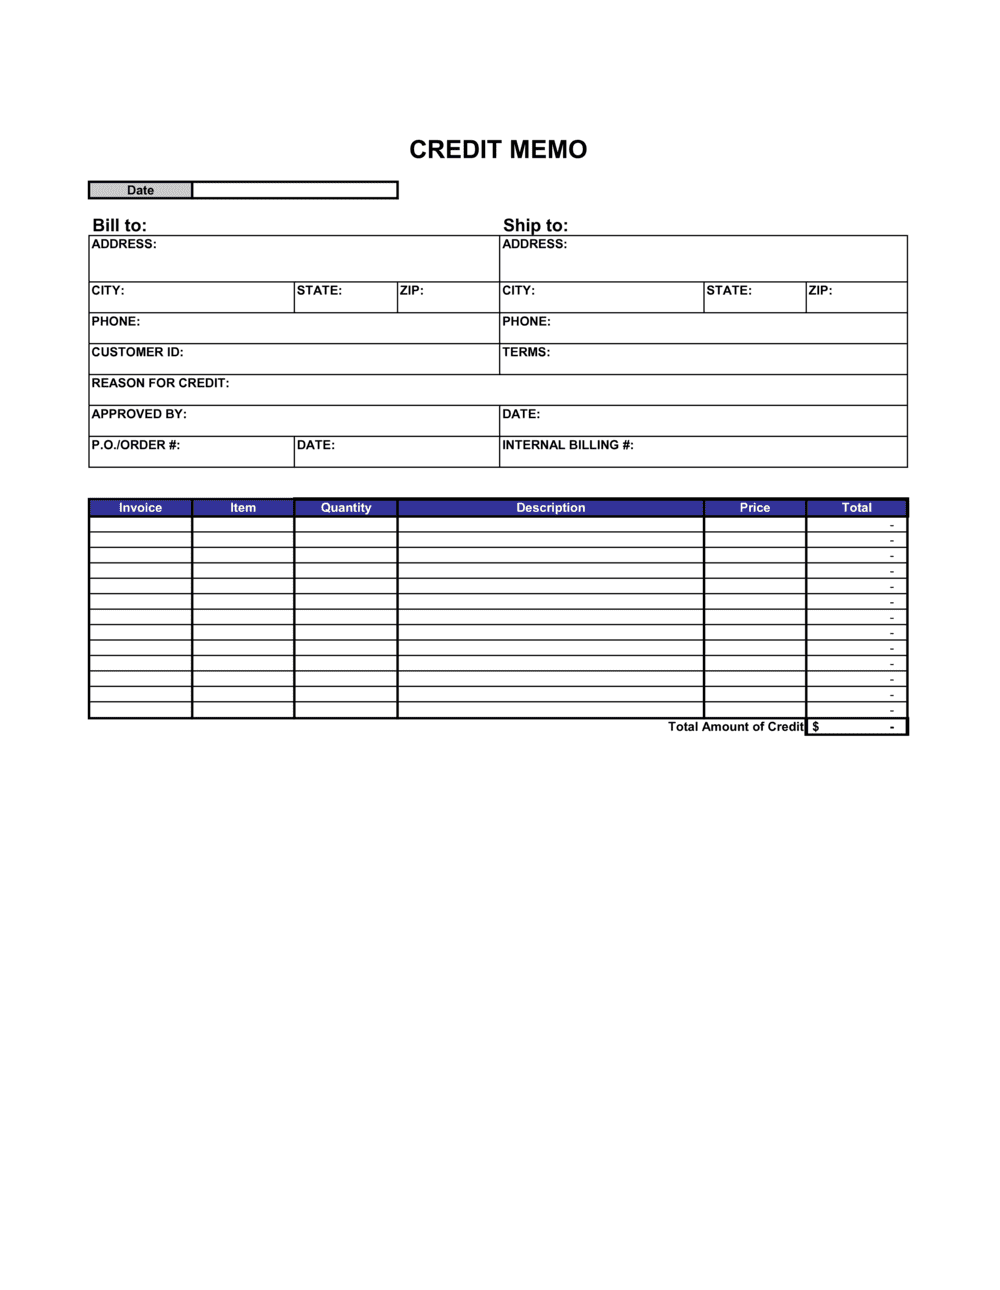 Credit Memo Excel Template by BusinessinaBox™